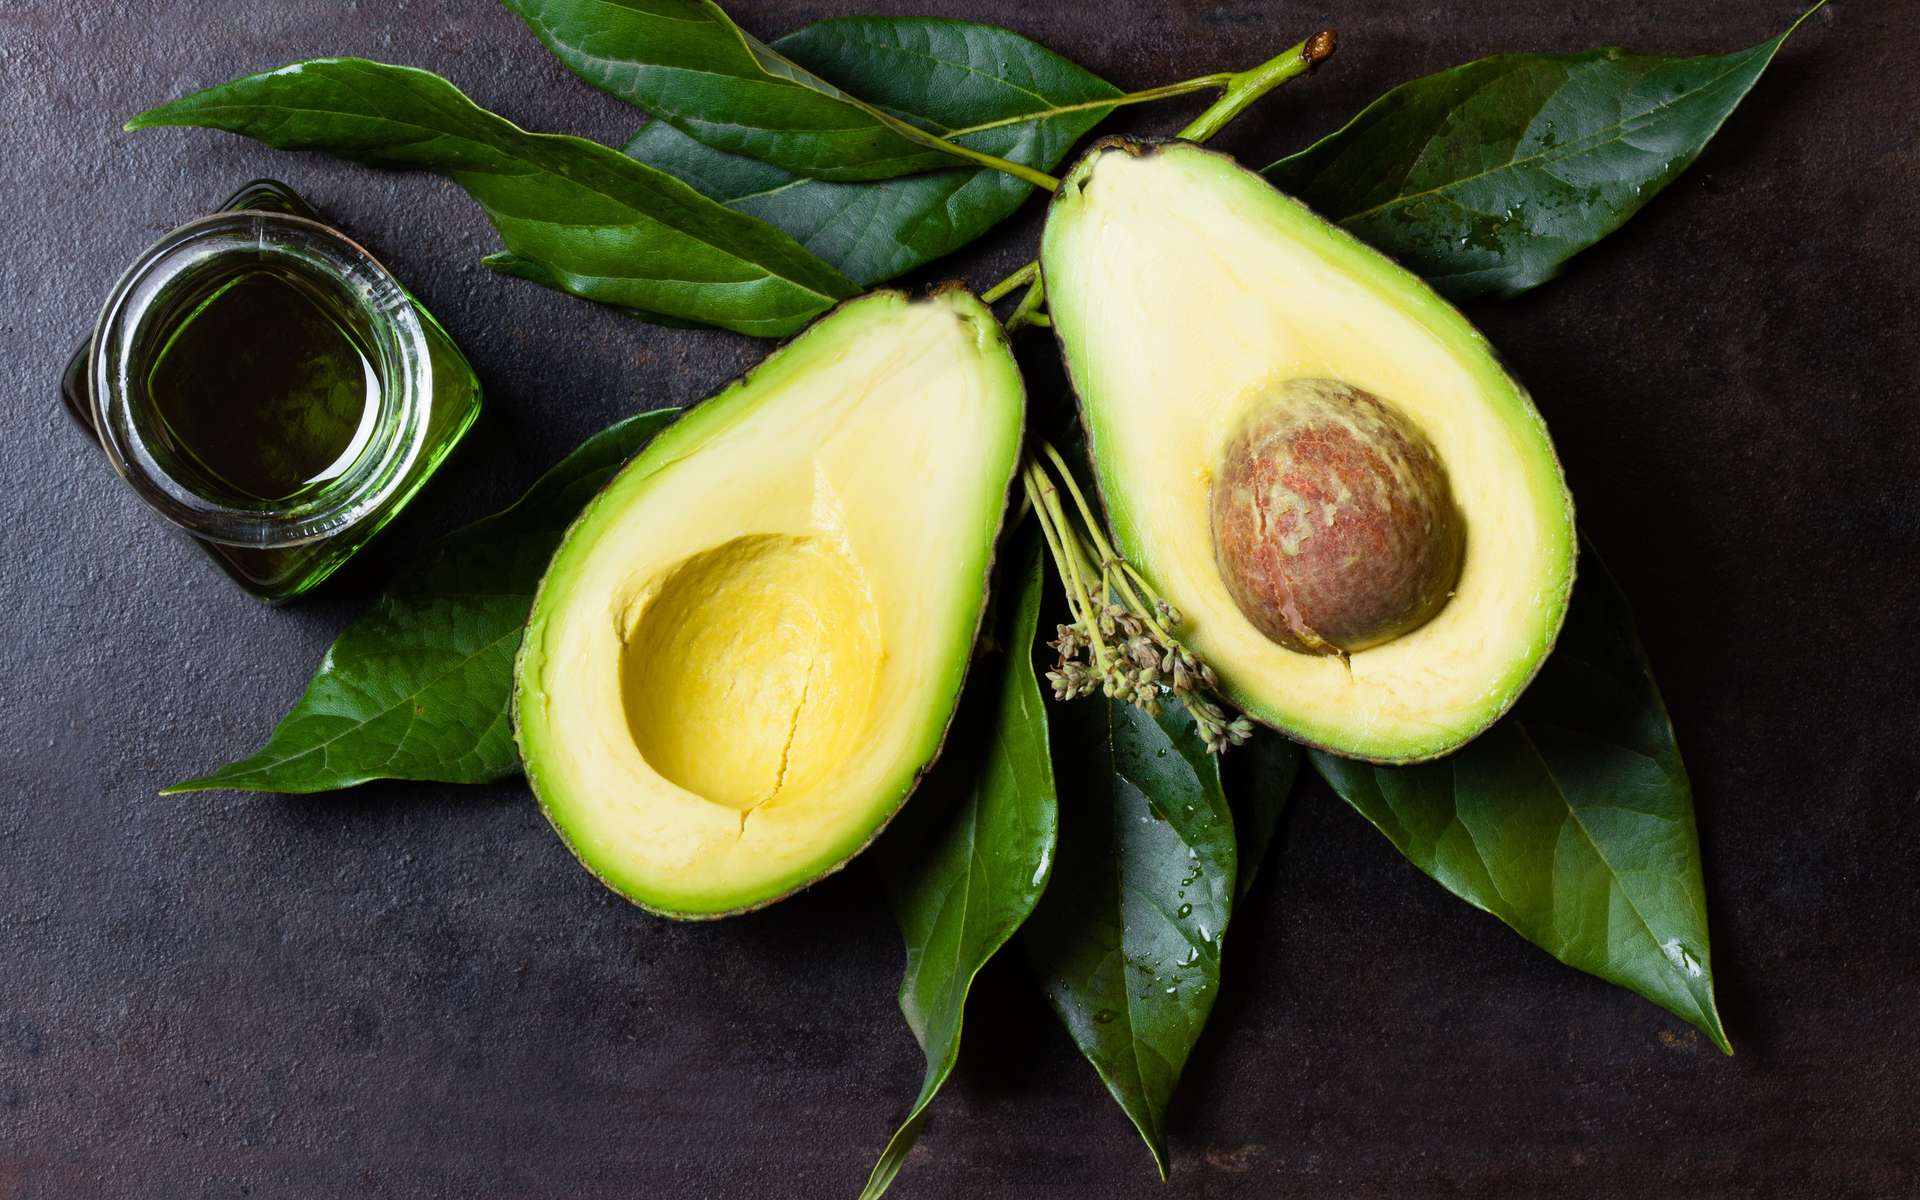 Scientists said that eating an avocado a week is good for the heart